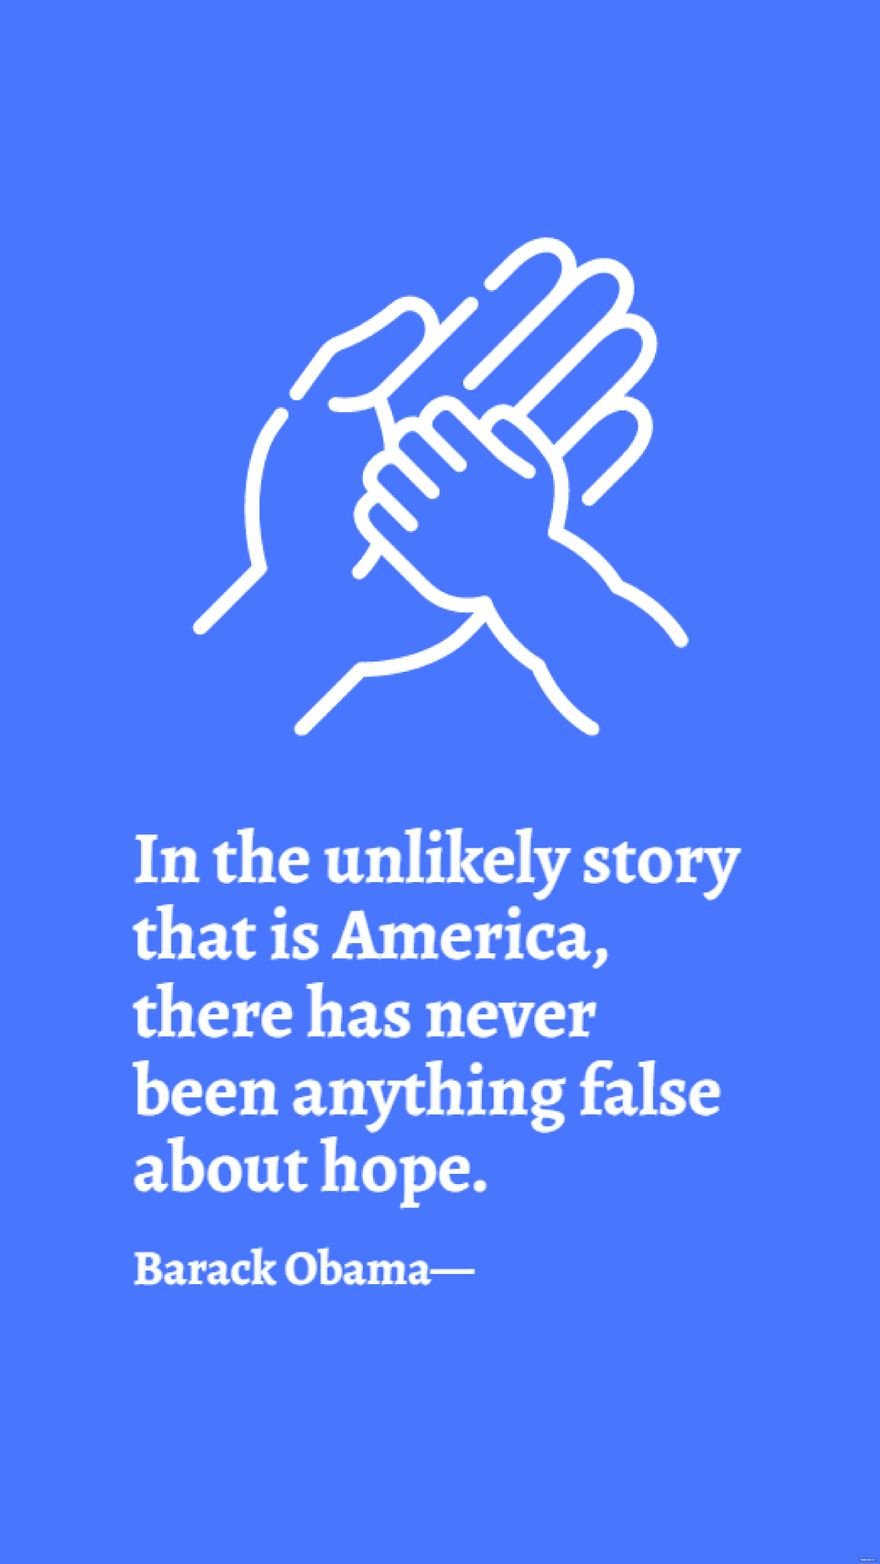 Free Barack Obama - In the unlikely story that is America, there has never been anything false about hope